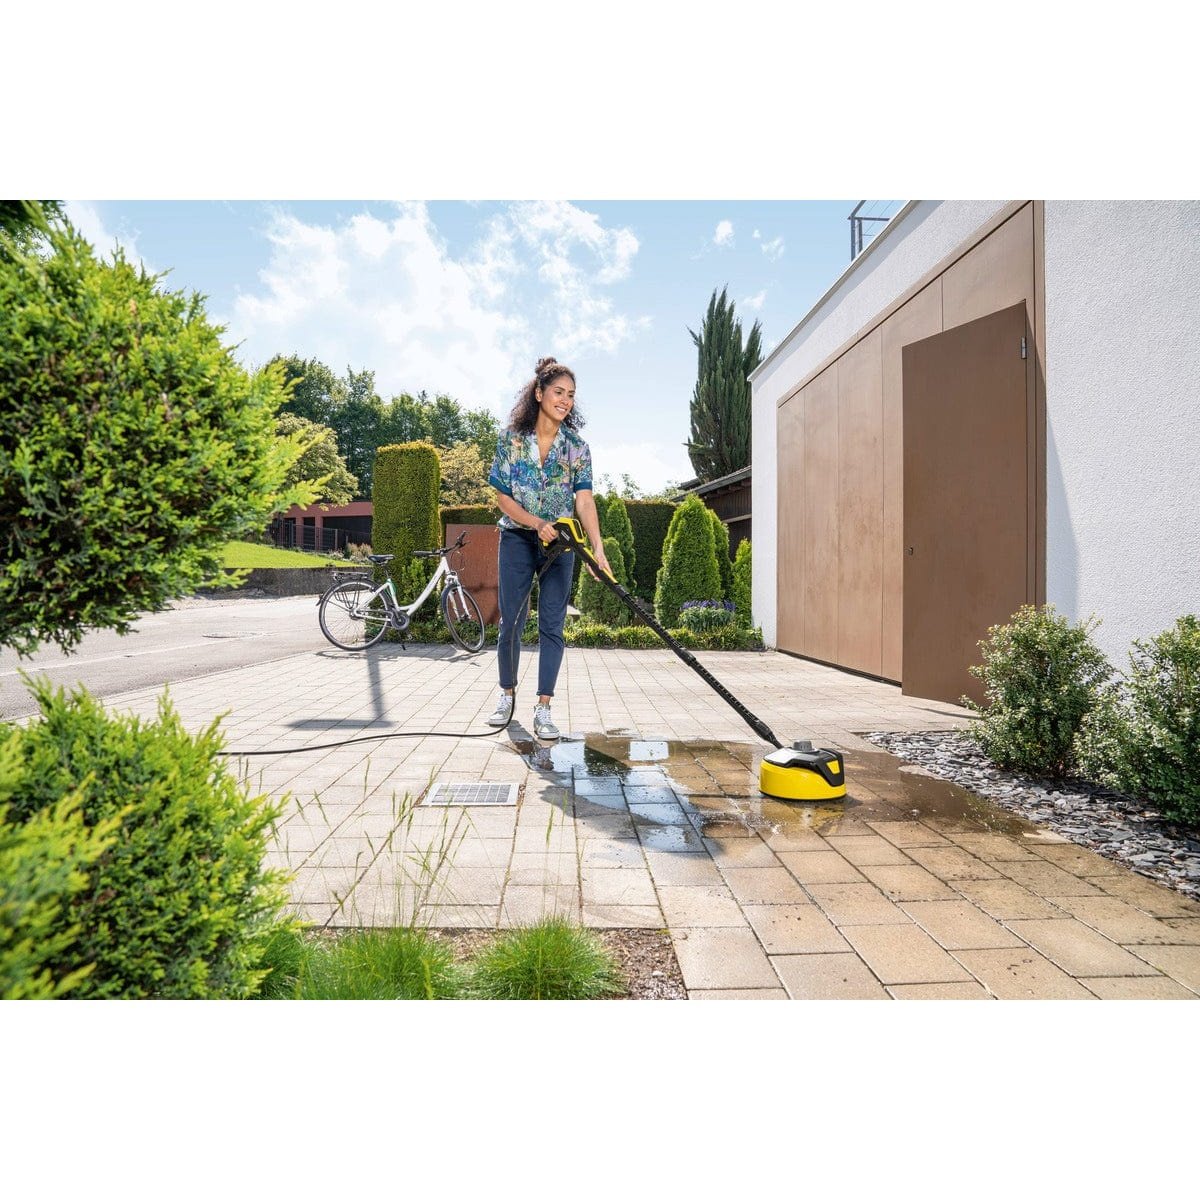 Karcher T-Racer Surface Cleaner - T5 | Supply Master | Accra, Ghana Pressure Washer Buy Tools hardware Building materials